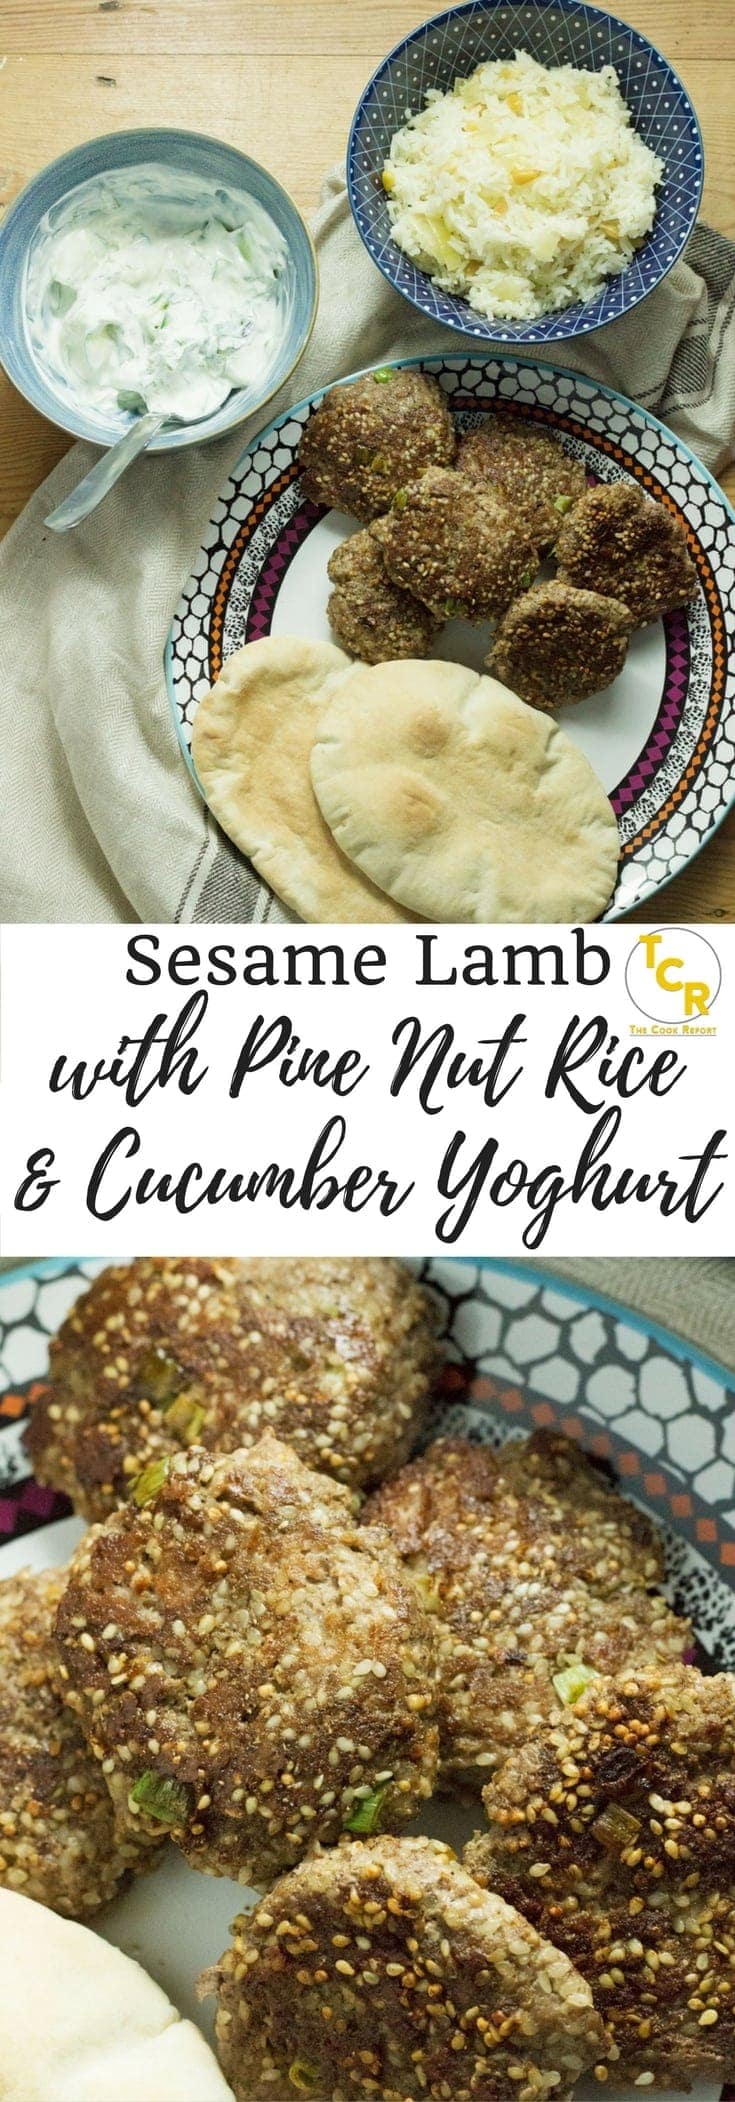 This sesame lamb recipe tastes delicious stuffed in a pitta with some cucumber and mint yoghurt drizzled on top and some pine nut rice on the side.